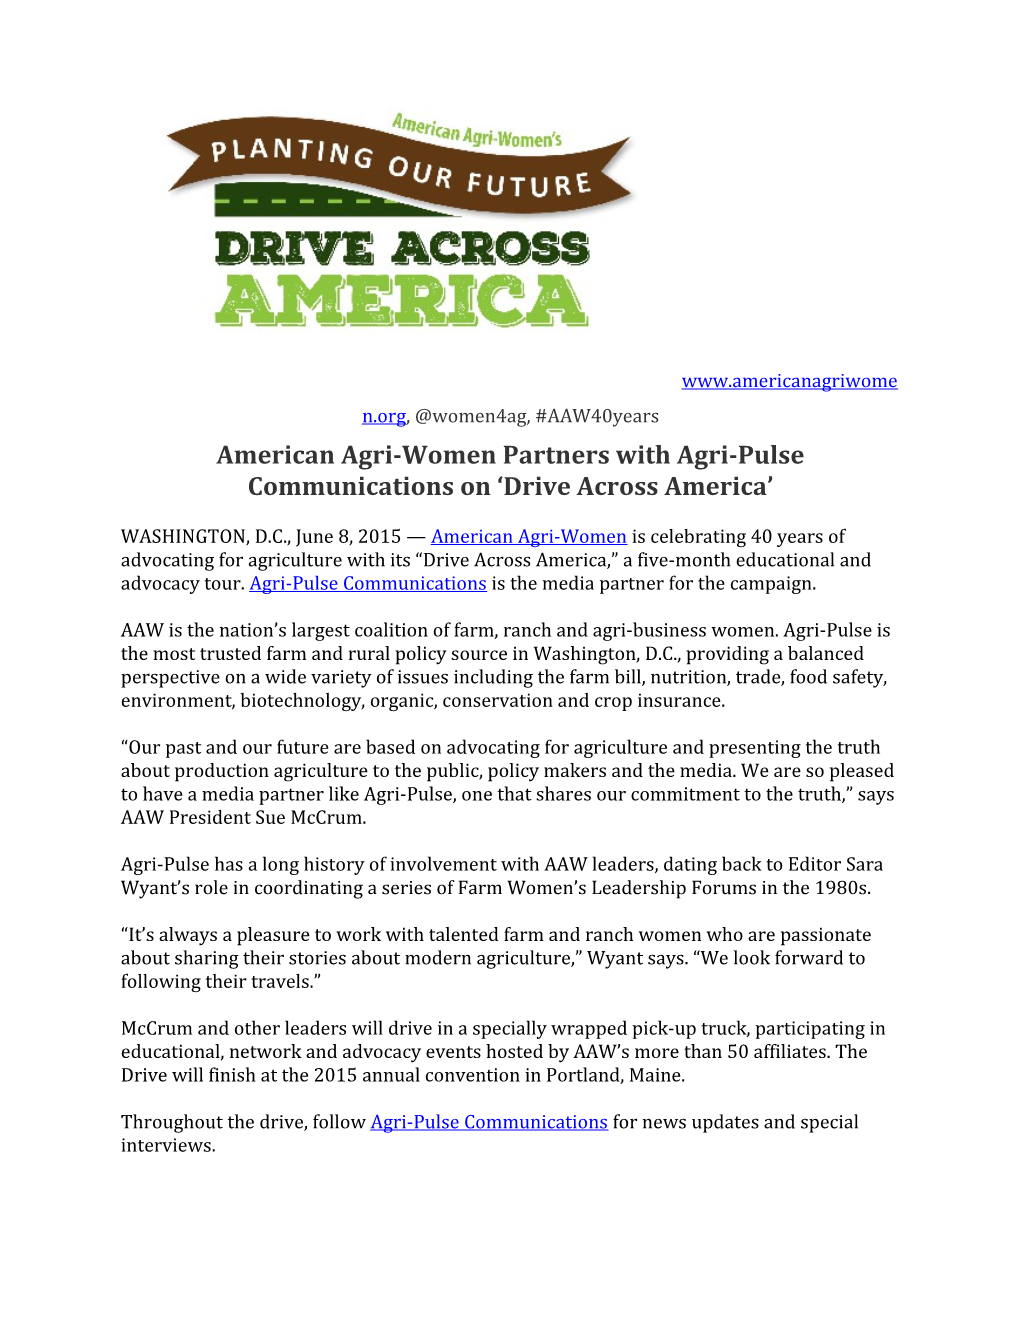 American Agri-Women Partners with Agri-Pulse Communications on Drive Across America